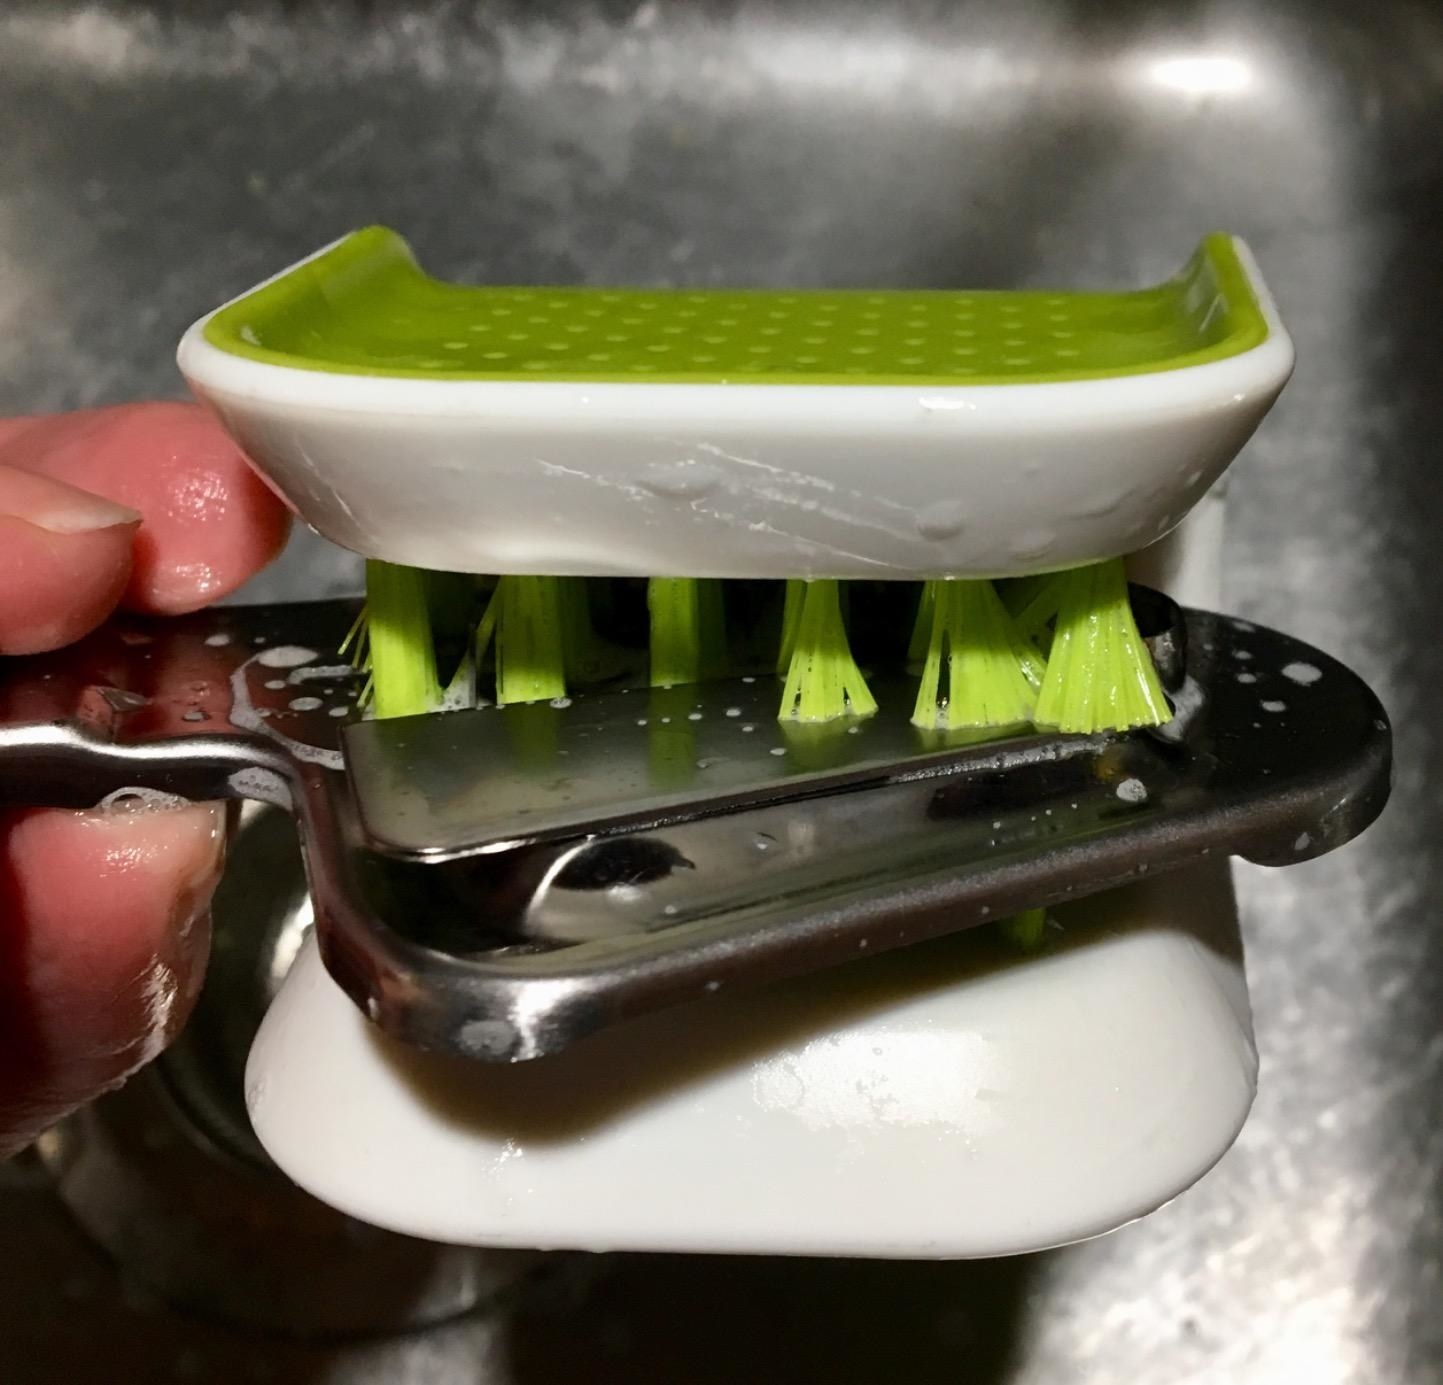 Reviewer using the green scrubber to clean sharp blade